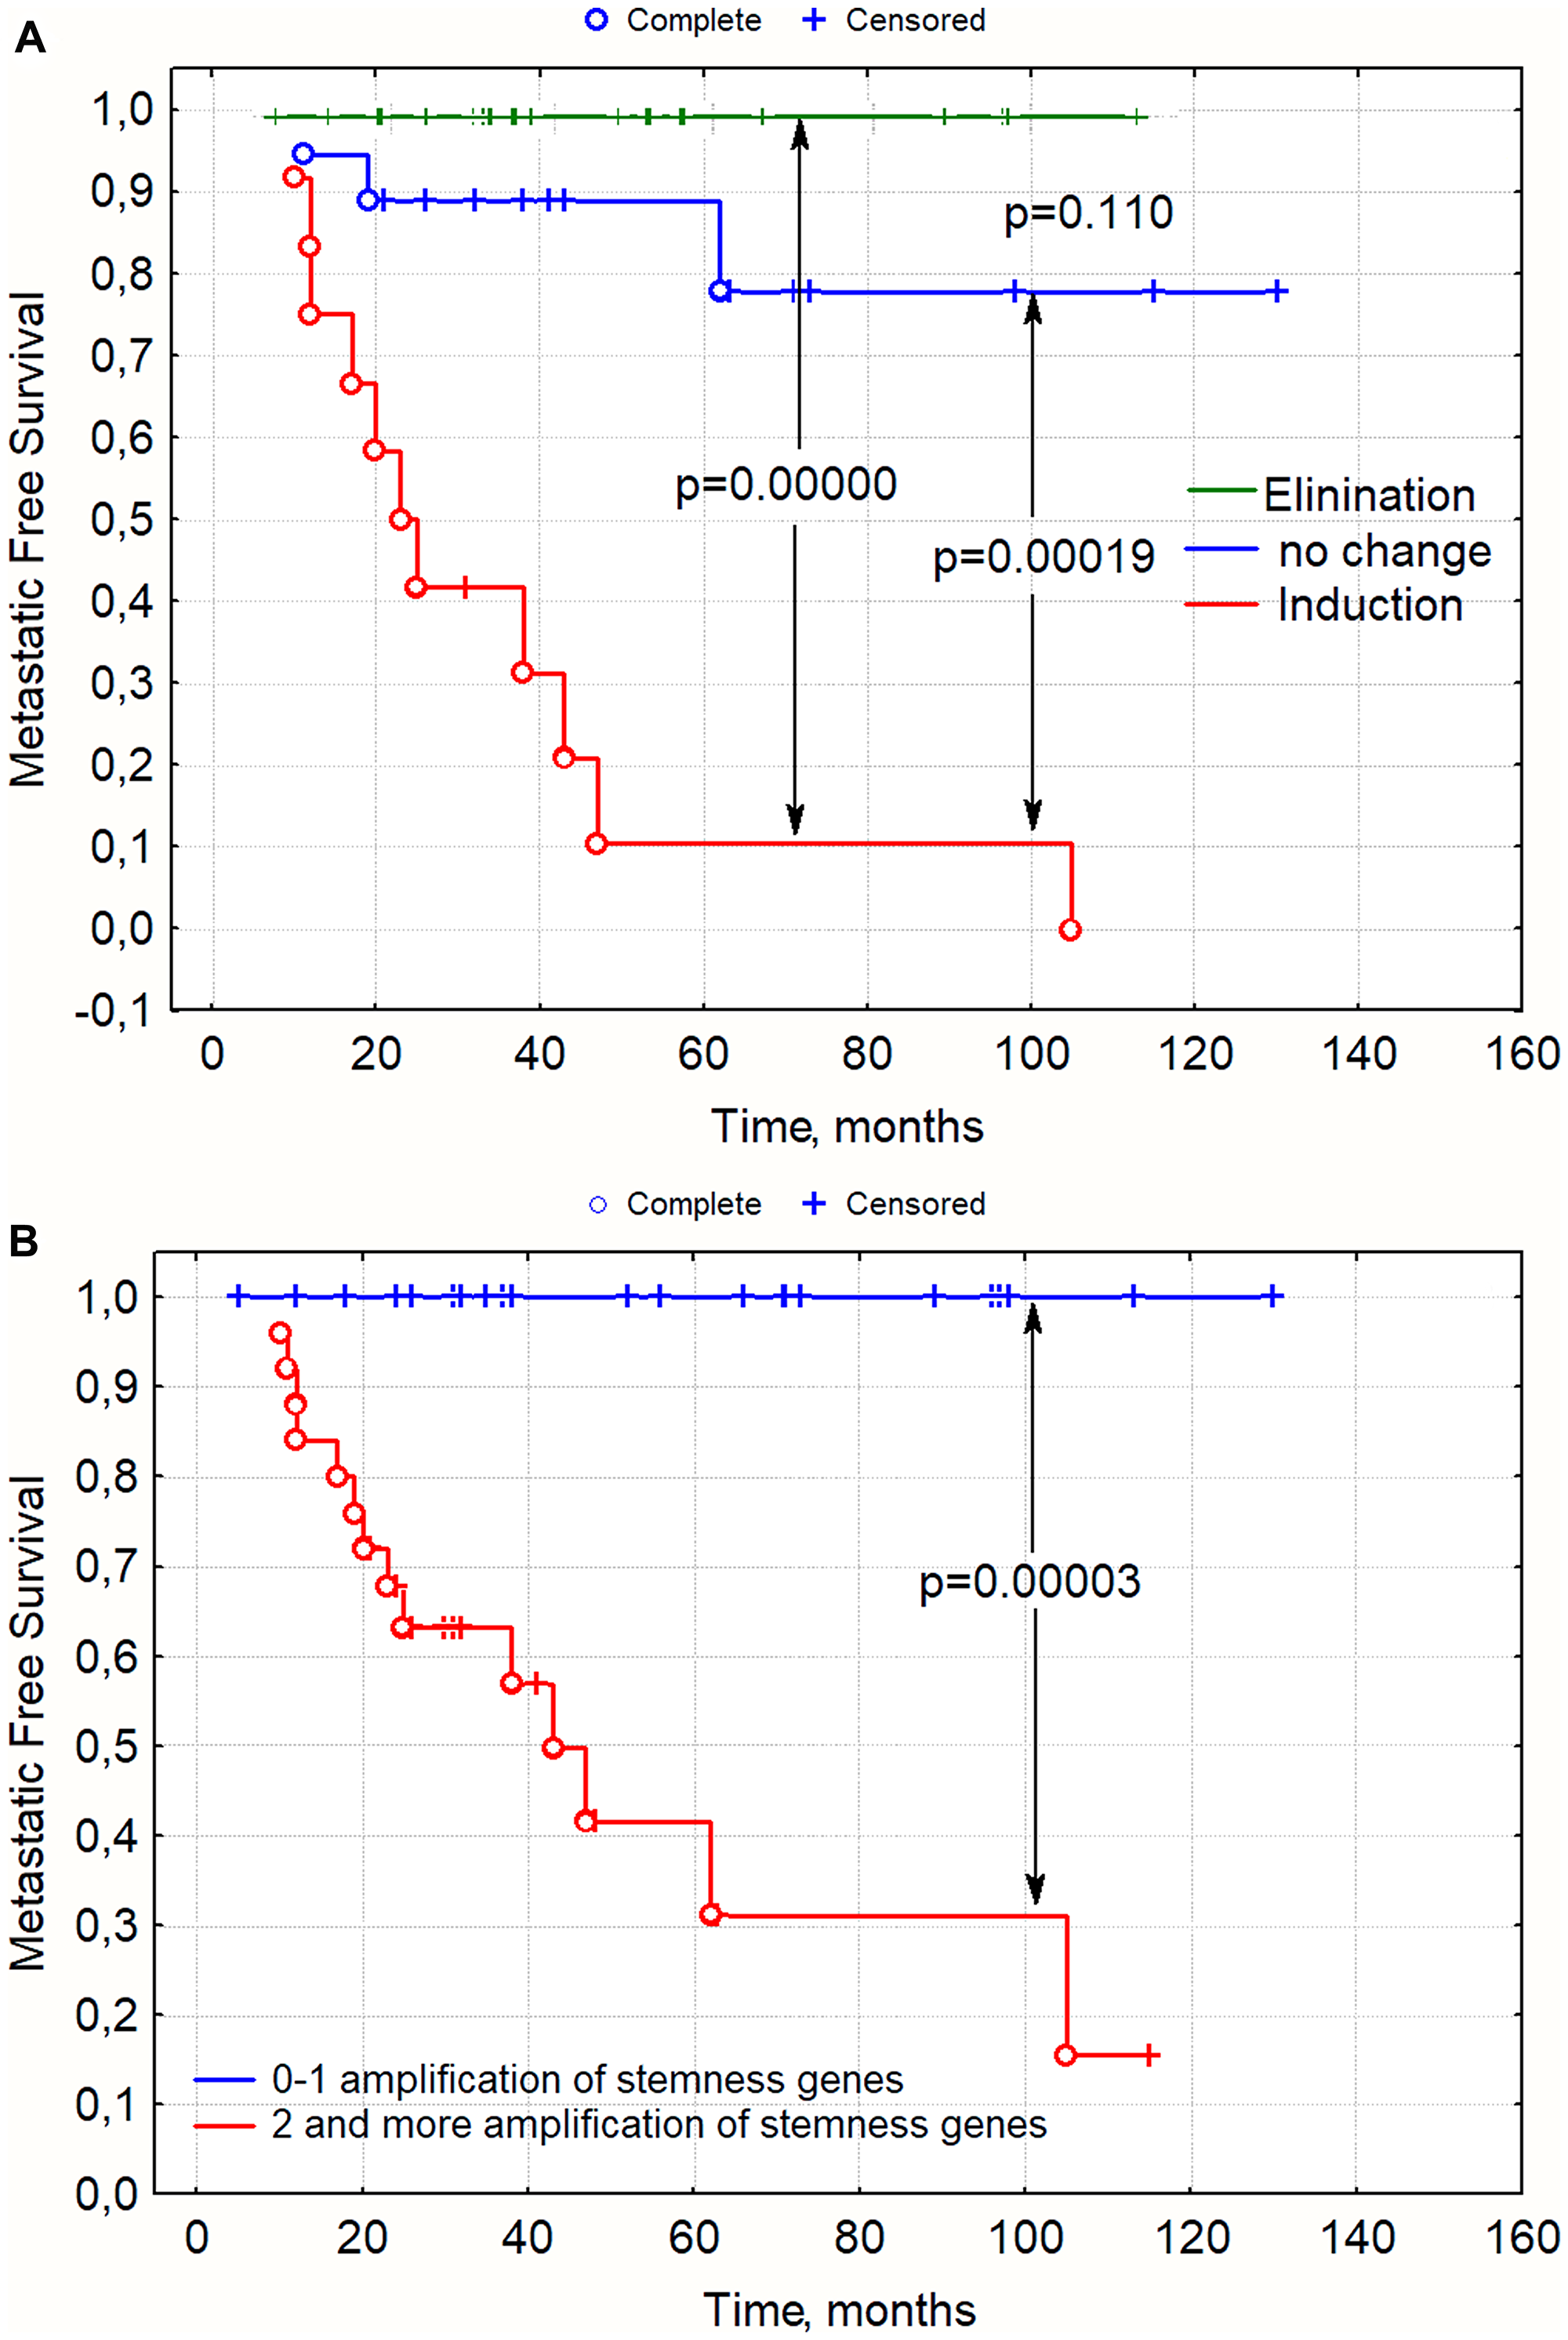 Figure 1: Metastasis-free survival rate in patients with breast cancer depending on changes in stemness gene amplifications during NAC (1a) and presence of amplifications in the residual tumor after NAC, (1b) p-value–log rank test.